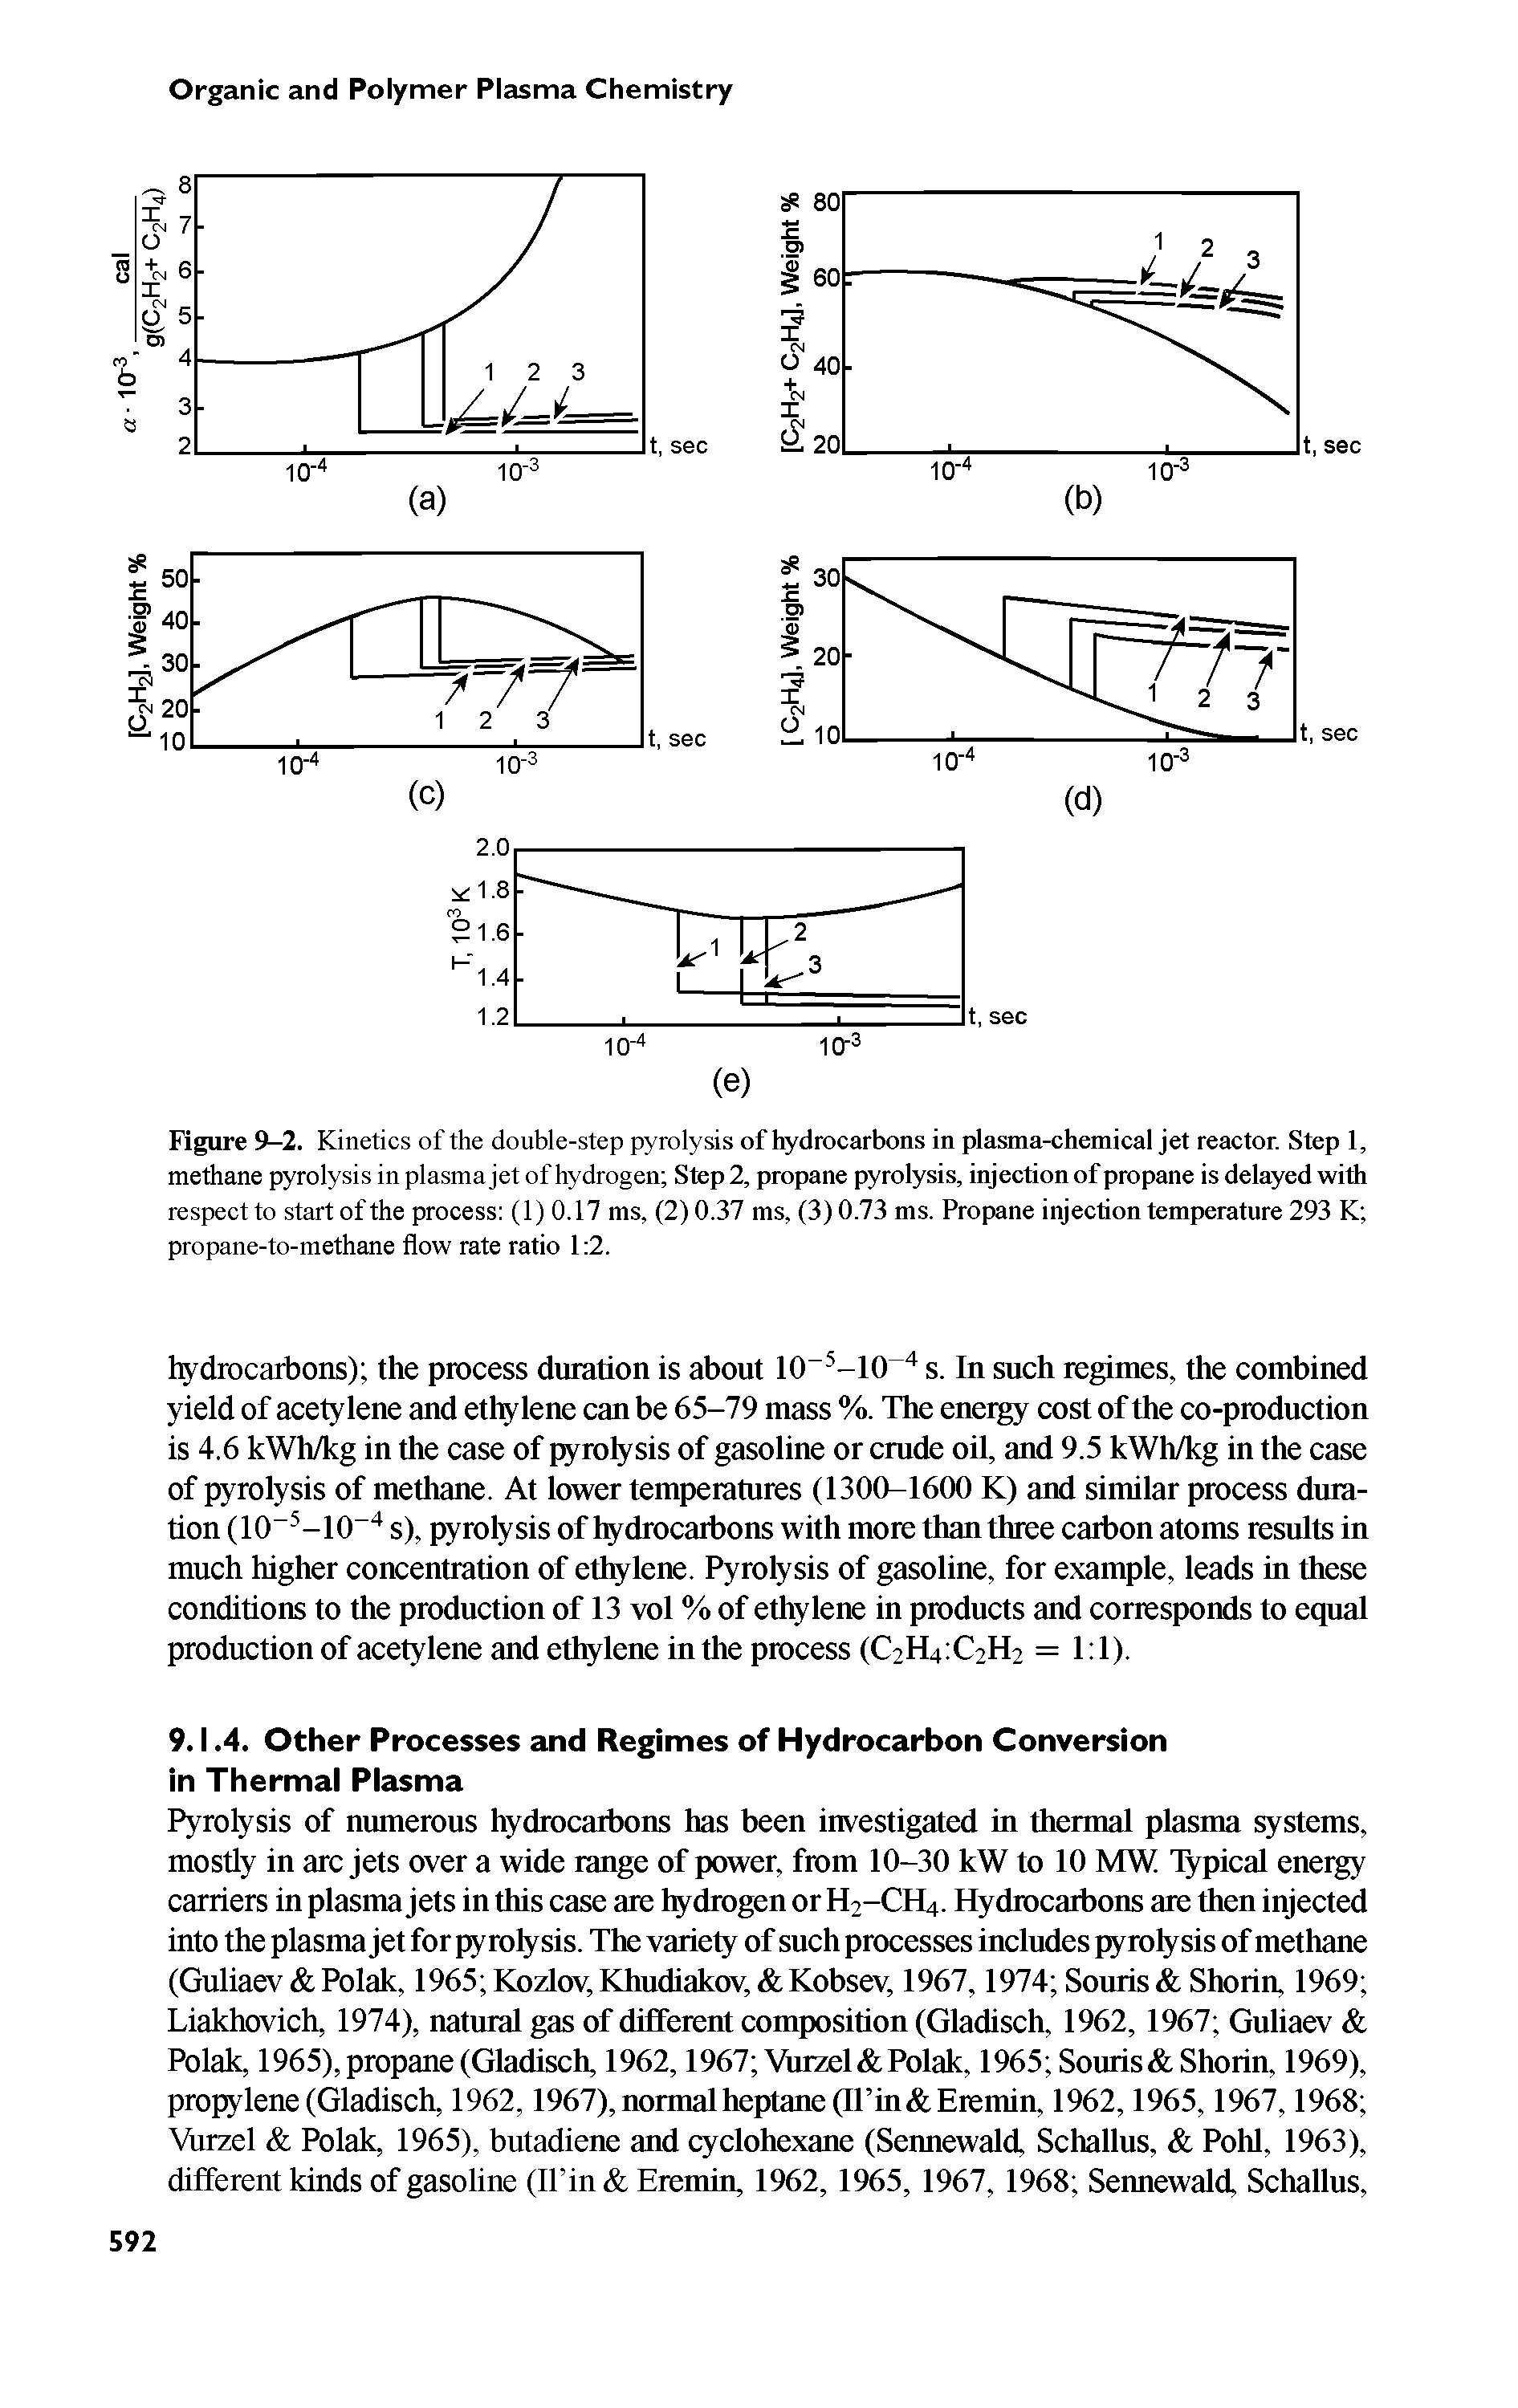 Figure 9-2. Kinetics of the double-step pyrolysis of hydrocarbons in plasma-chemical jet reactor. Step 1, methane pyrolysis inplasmajet of hydrogen Step 2, propane pyrolysis, injection of propane is delayed with respect to start of the process (1) 0.17 ms, (2) 0.37 ms, (3) 0.73 ms. Propane injection temperature 293 K propane-to-methane flow rate ratio 1 2.